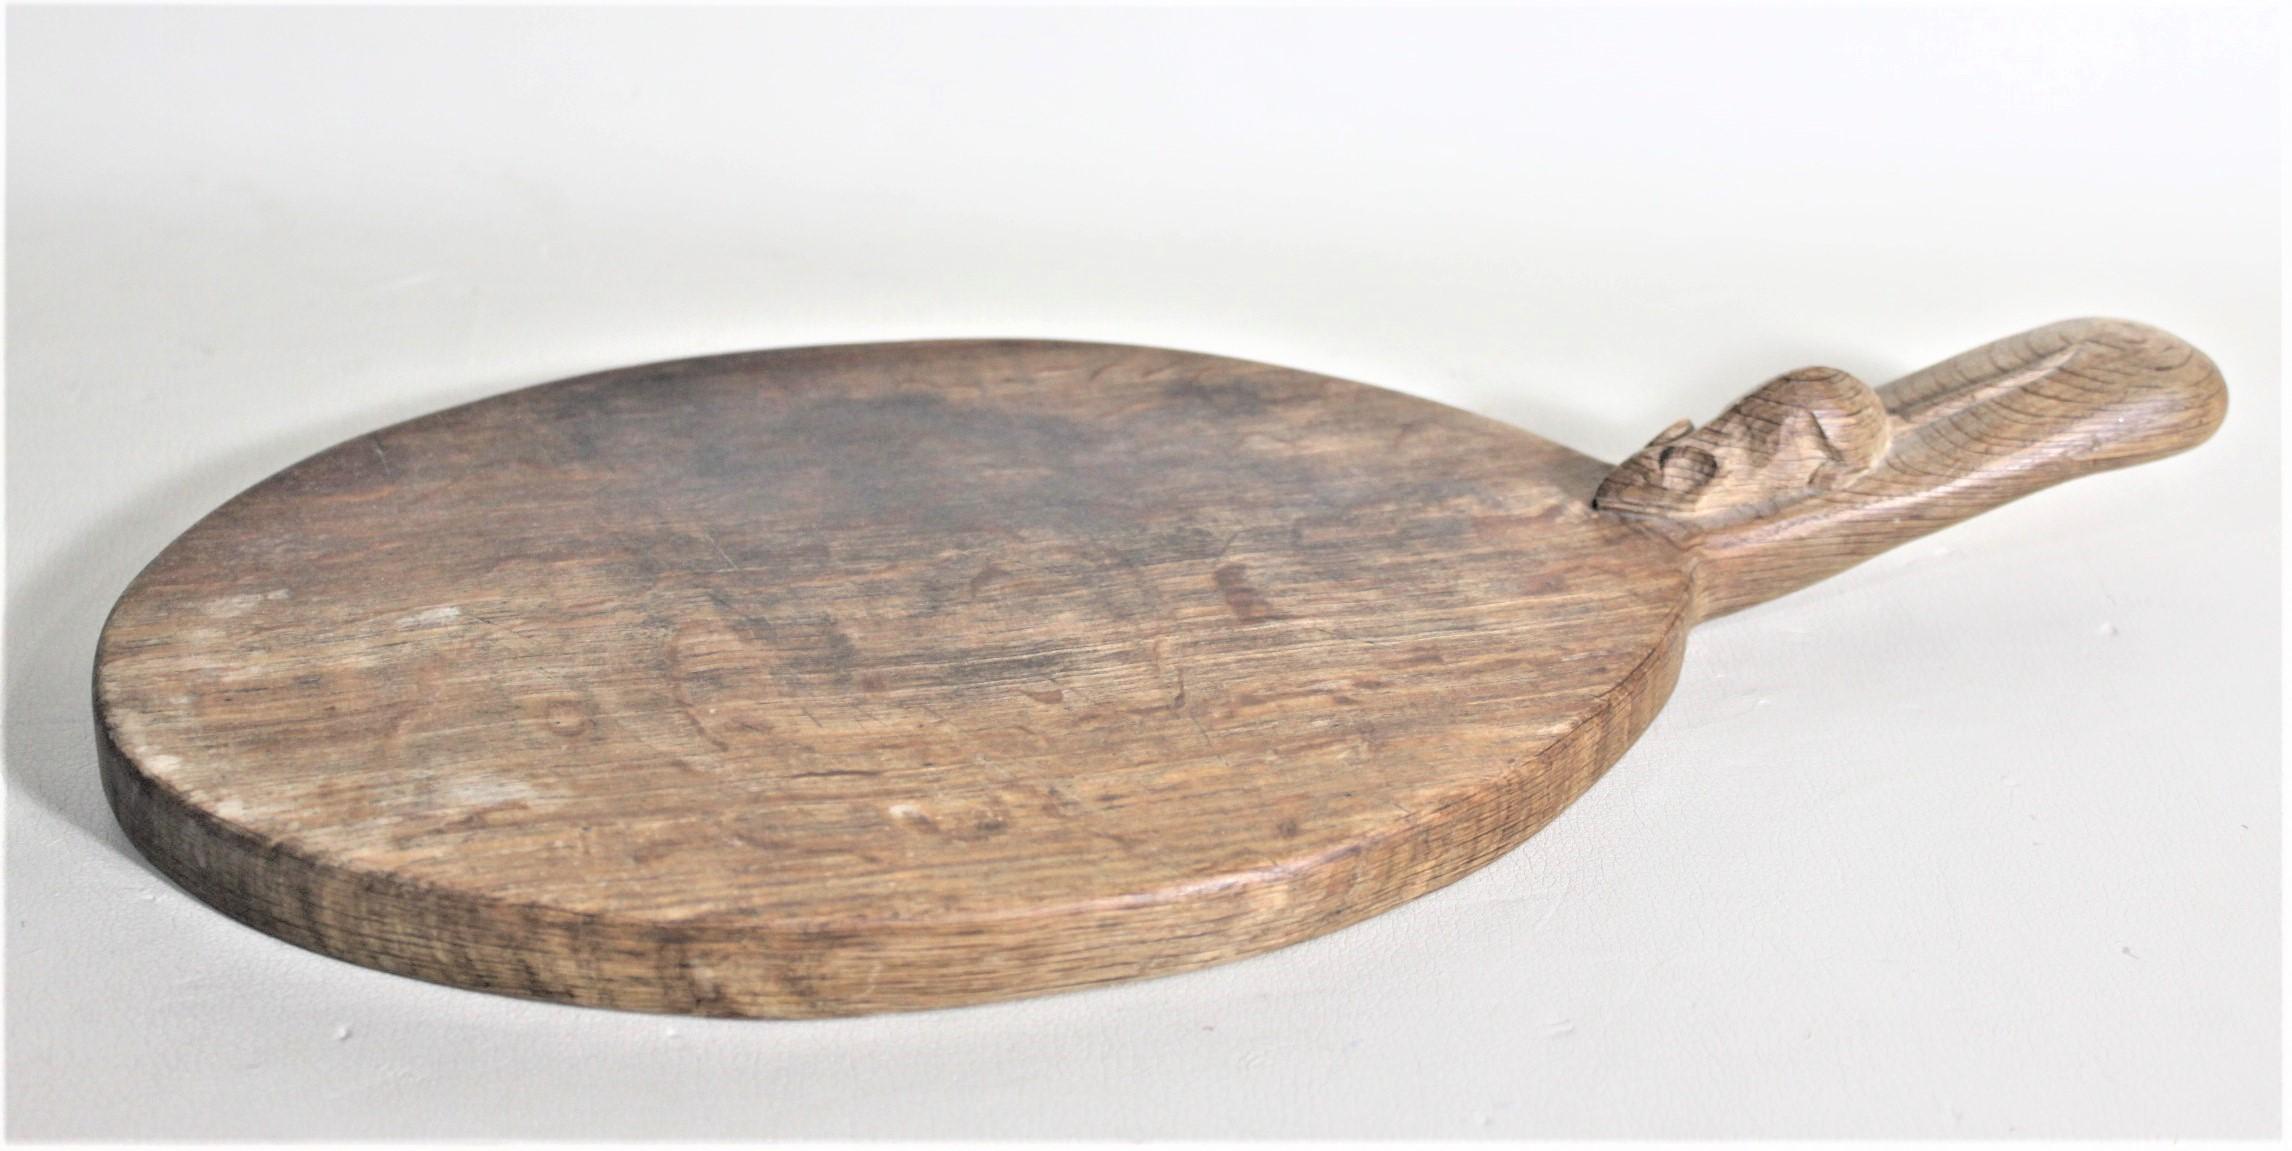 This solid oak oval cutting board was made by the renowned English furniture maker Robert 'Mouseman' Thompson in his signature Arts & Crafts style. The cutting board has a raised handle on one end with a hand carved mouse identifying it as being